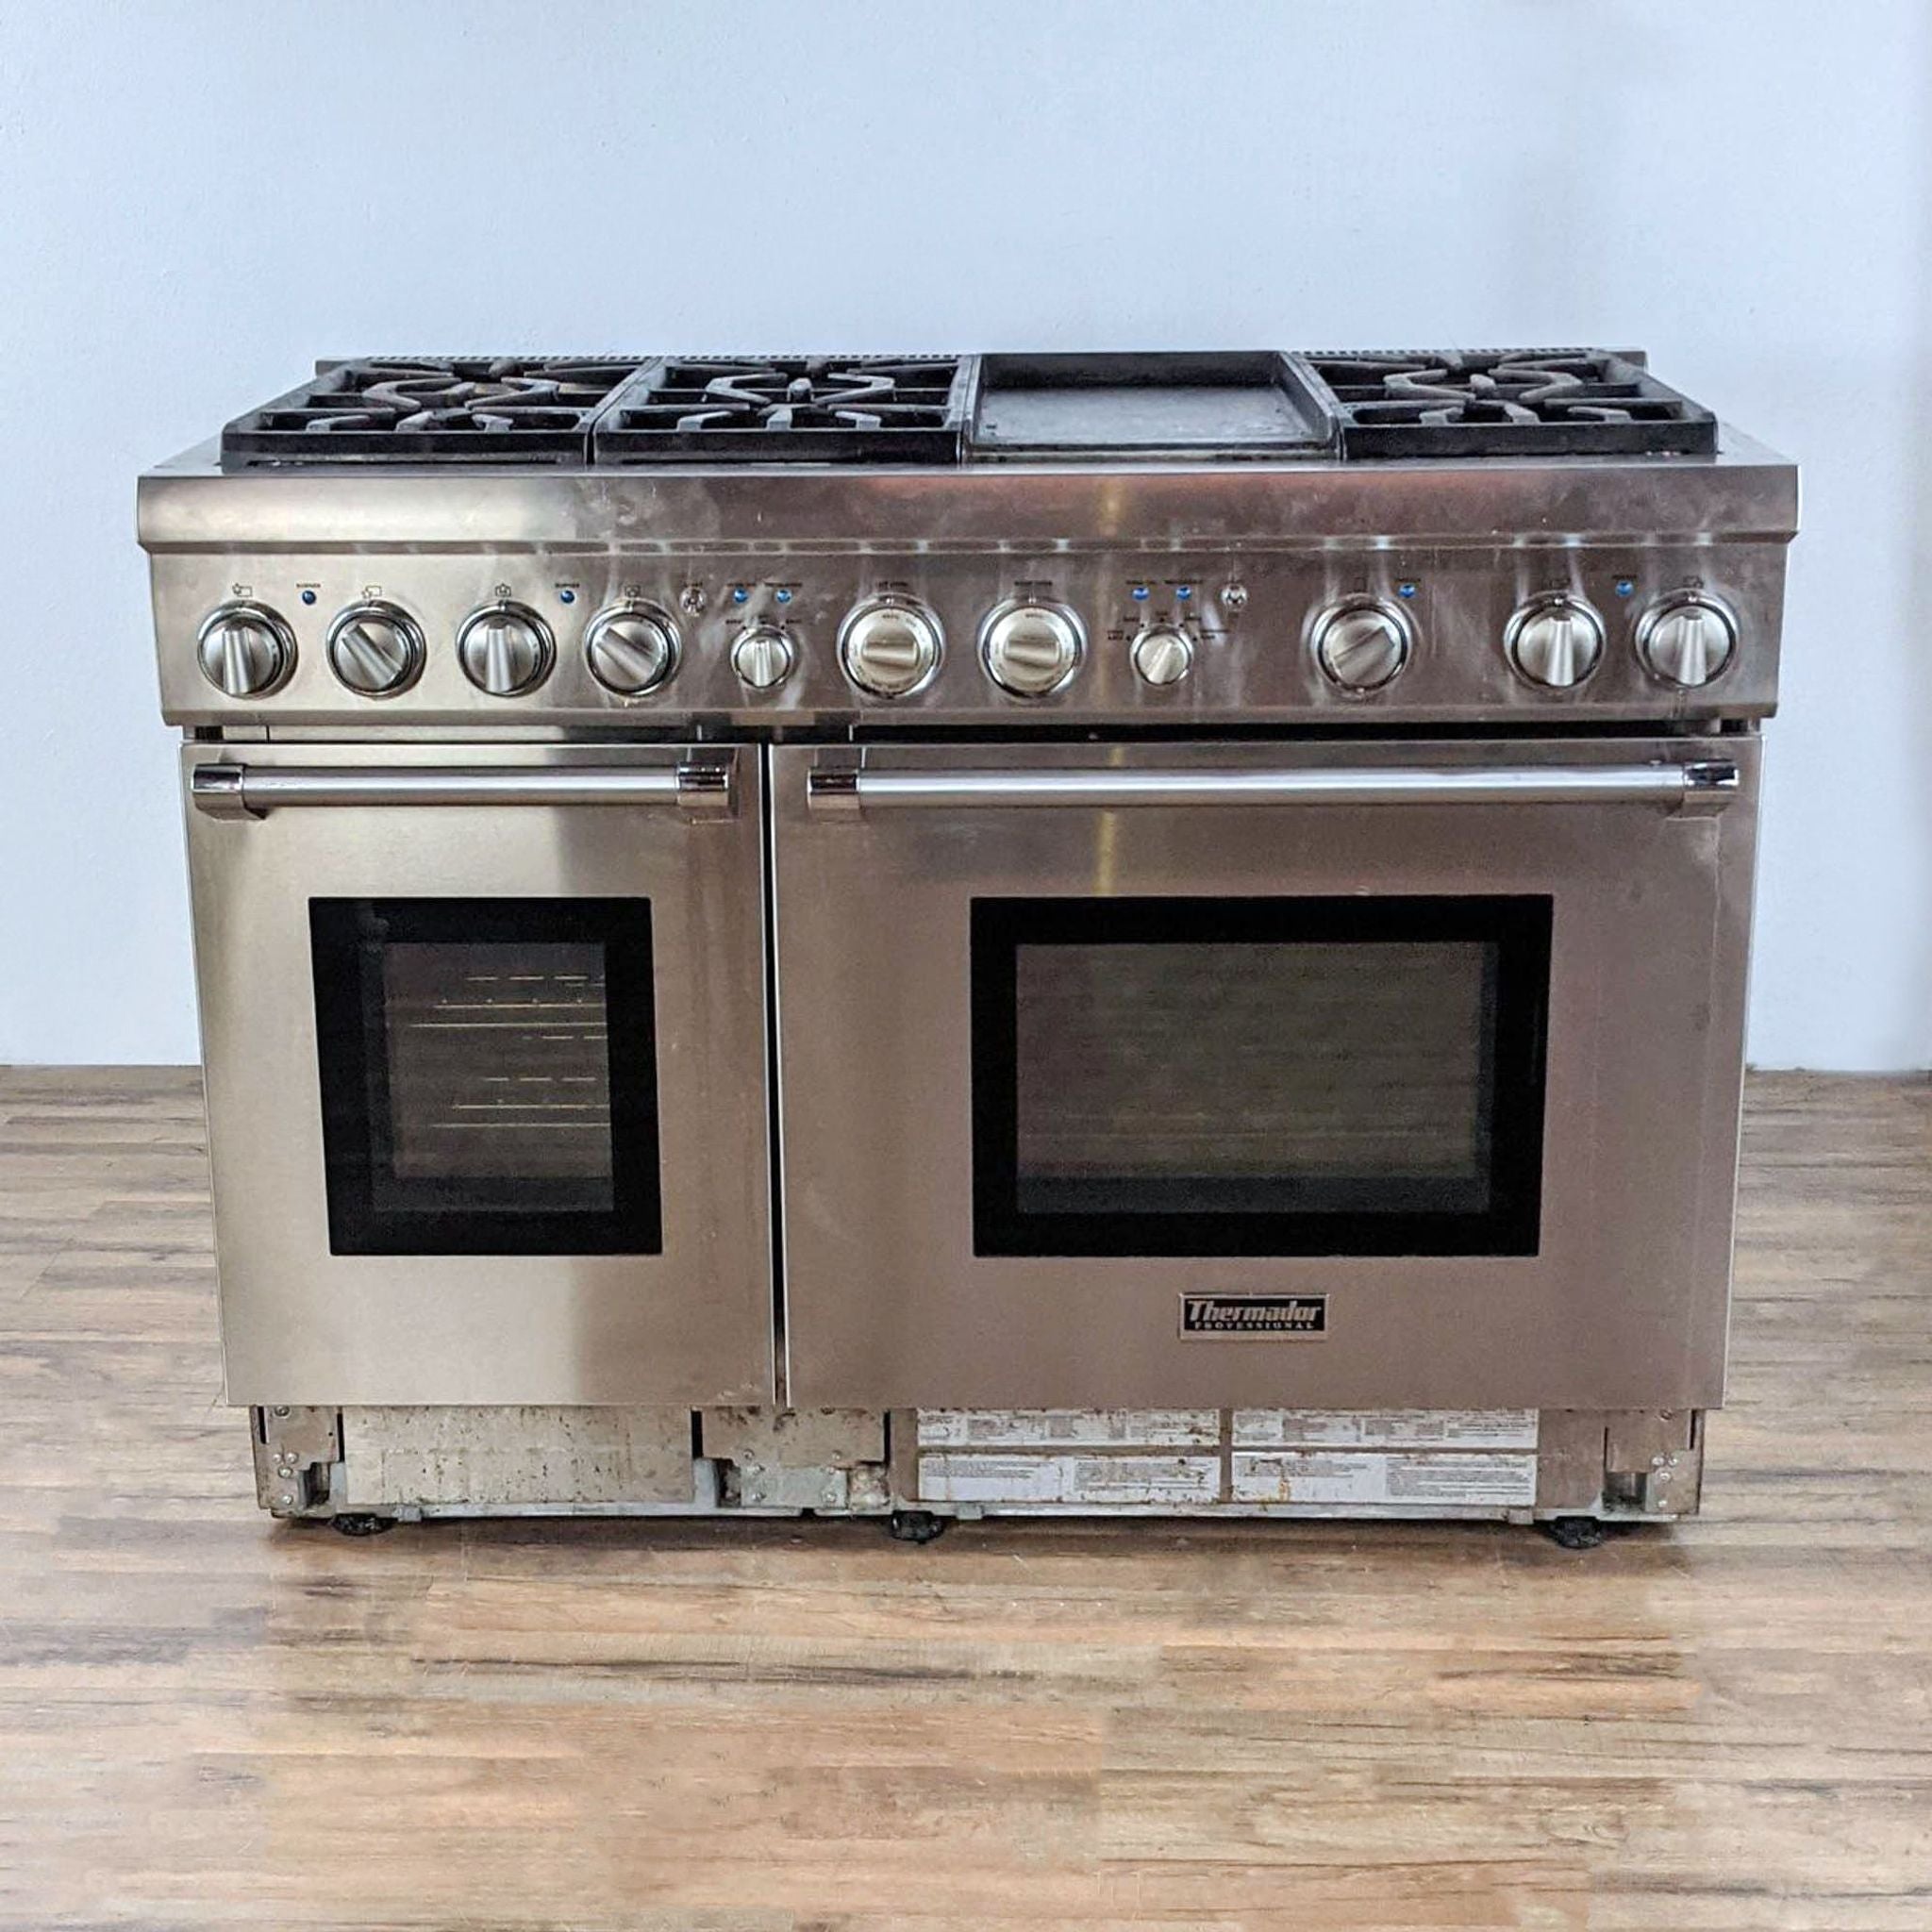 1. Stainless steel Thermador professional stove and oven combo with gas cooktop and dual ovens, displayed on a hardwood floor.